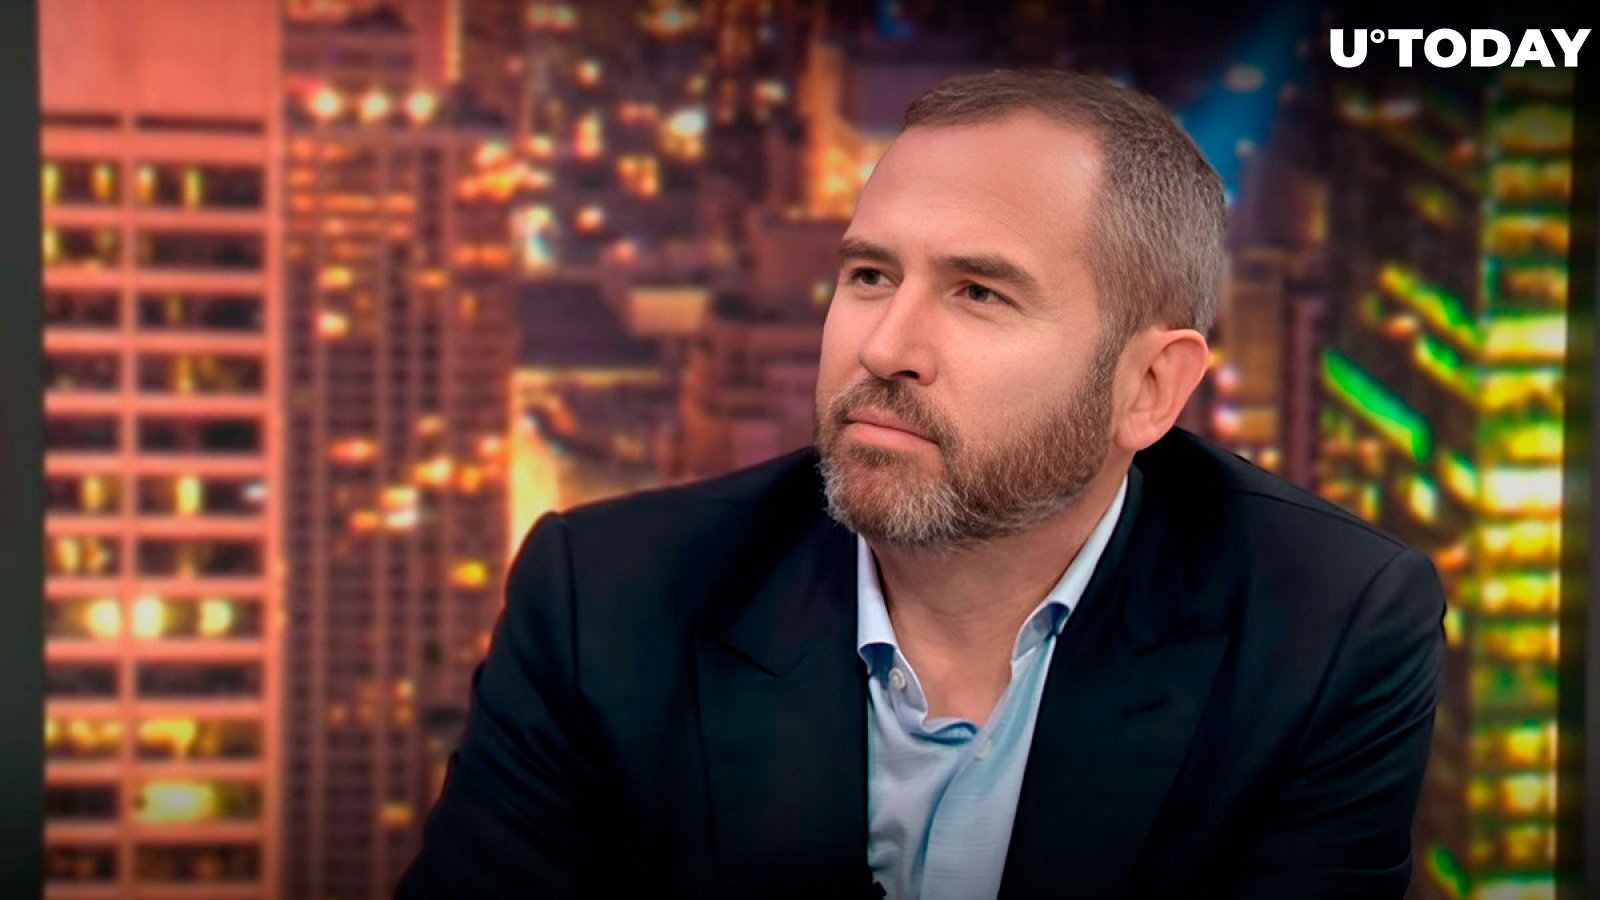 Ripple CEO Very Optimistic About Future of Crypto Space and Tokenization